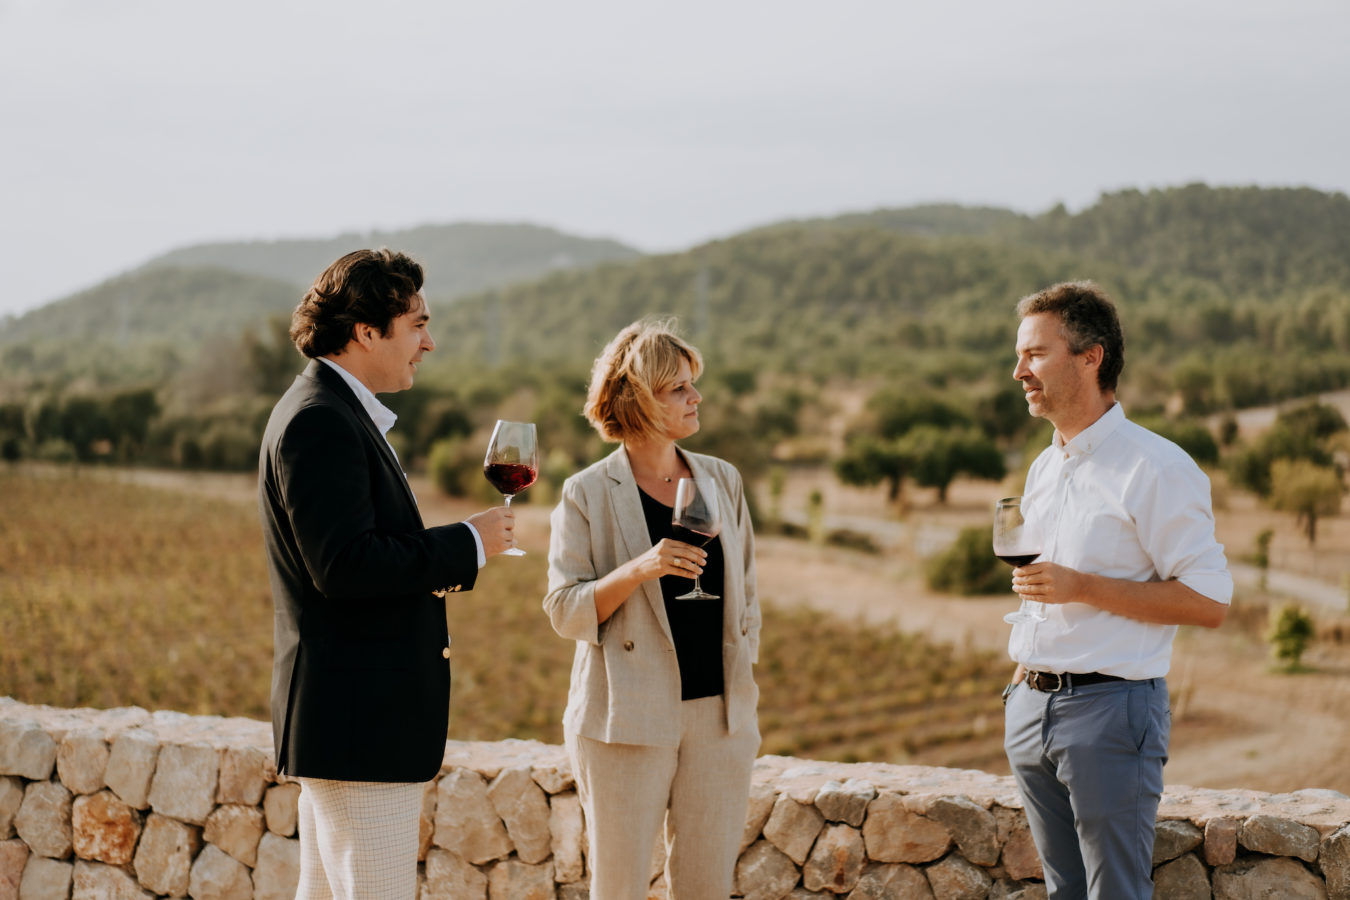 Bodega Son Mayol: Bordeaux meets the Mediterranean in this up-and-coming Mallorcan winery